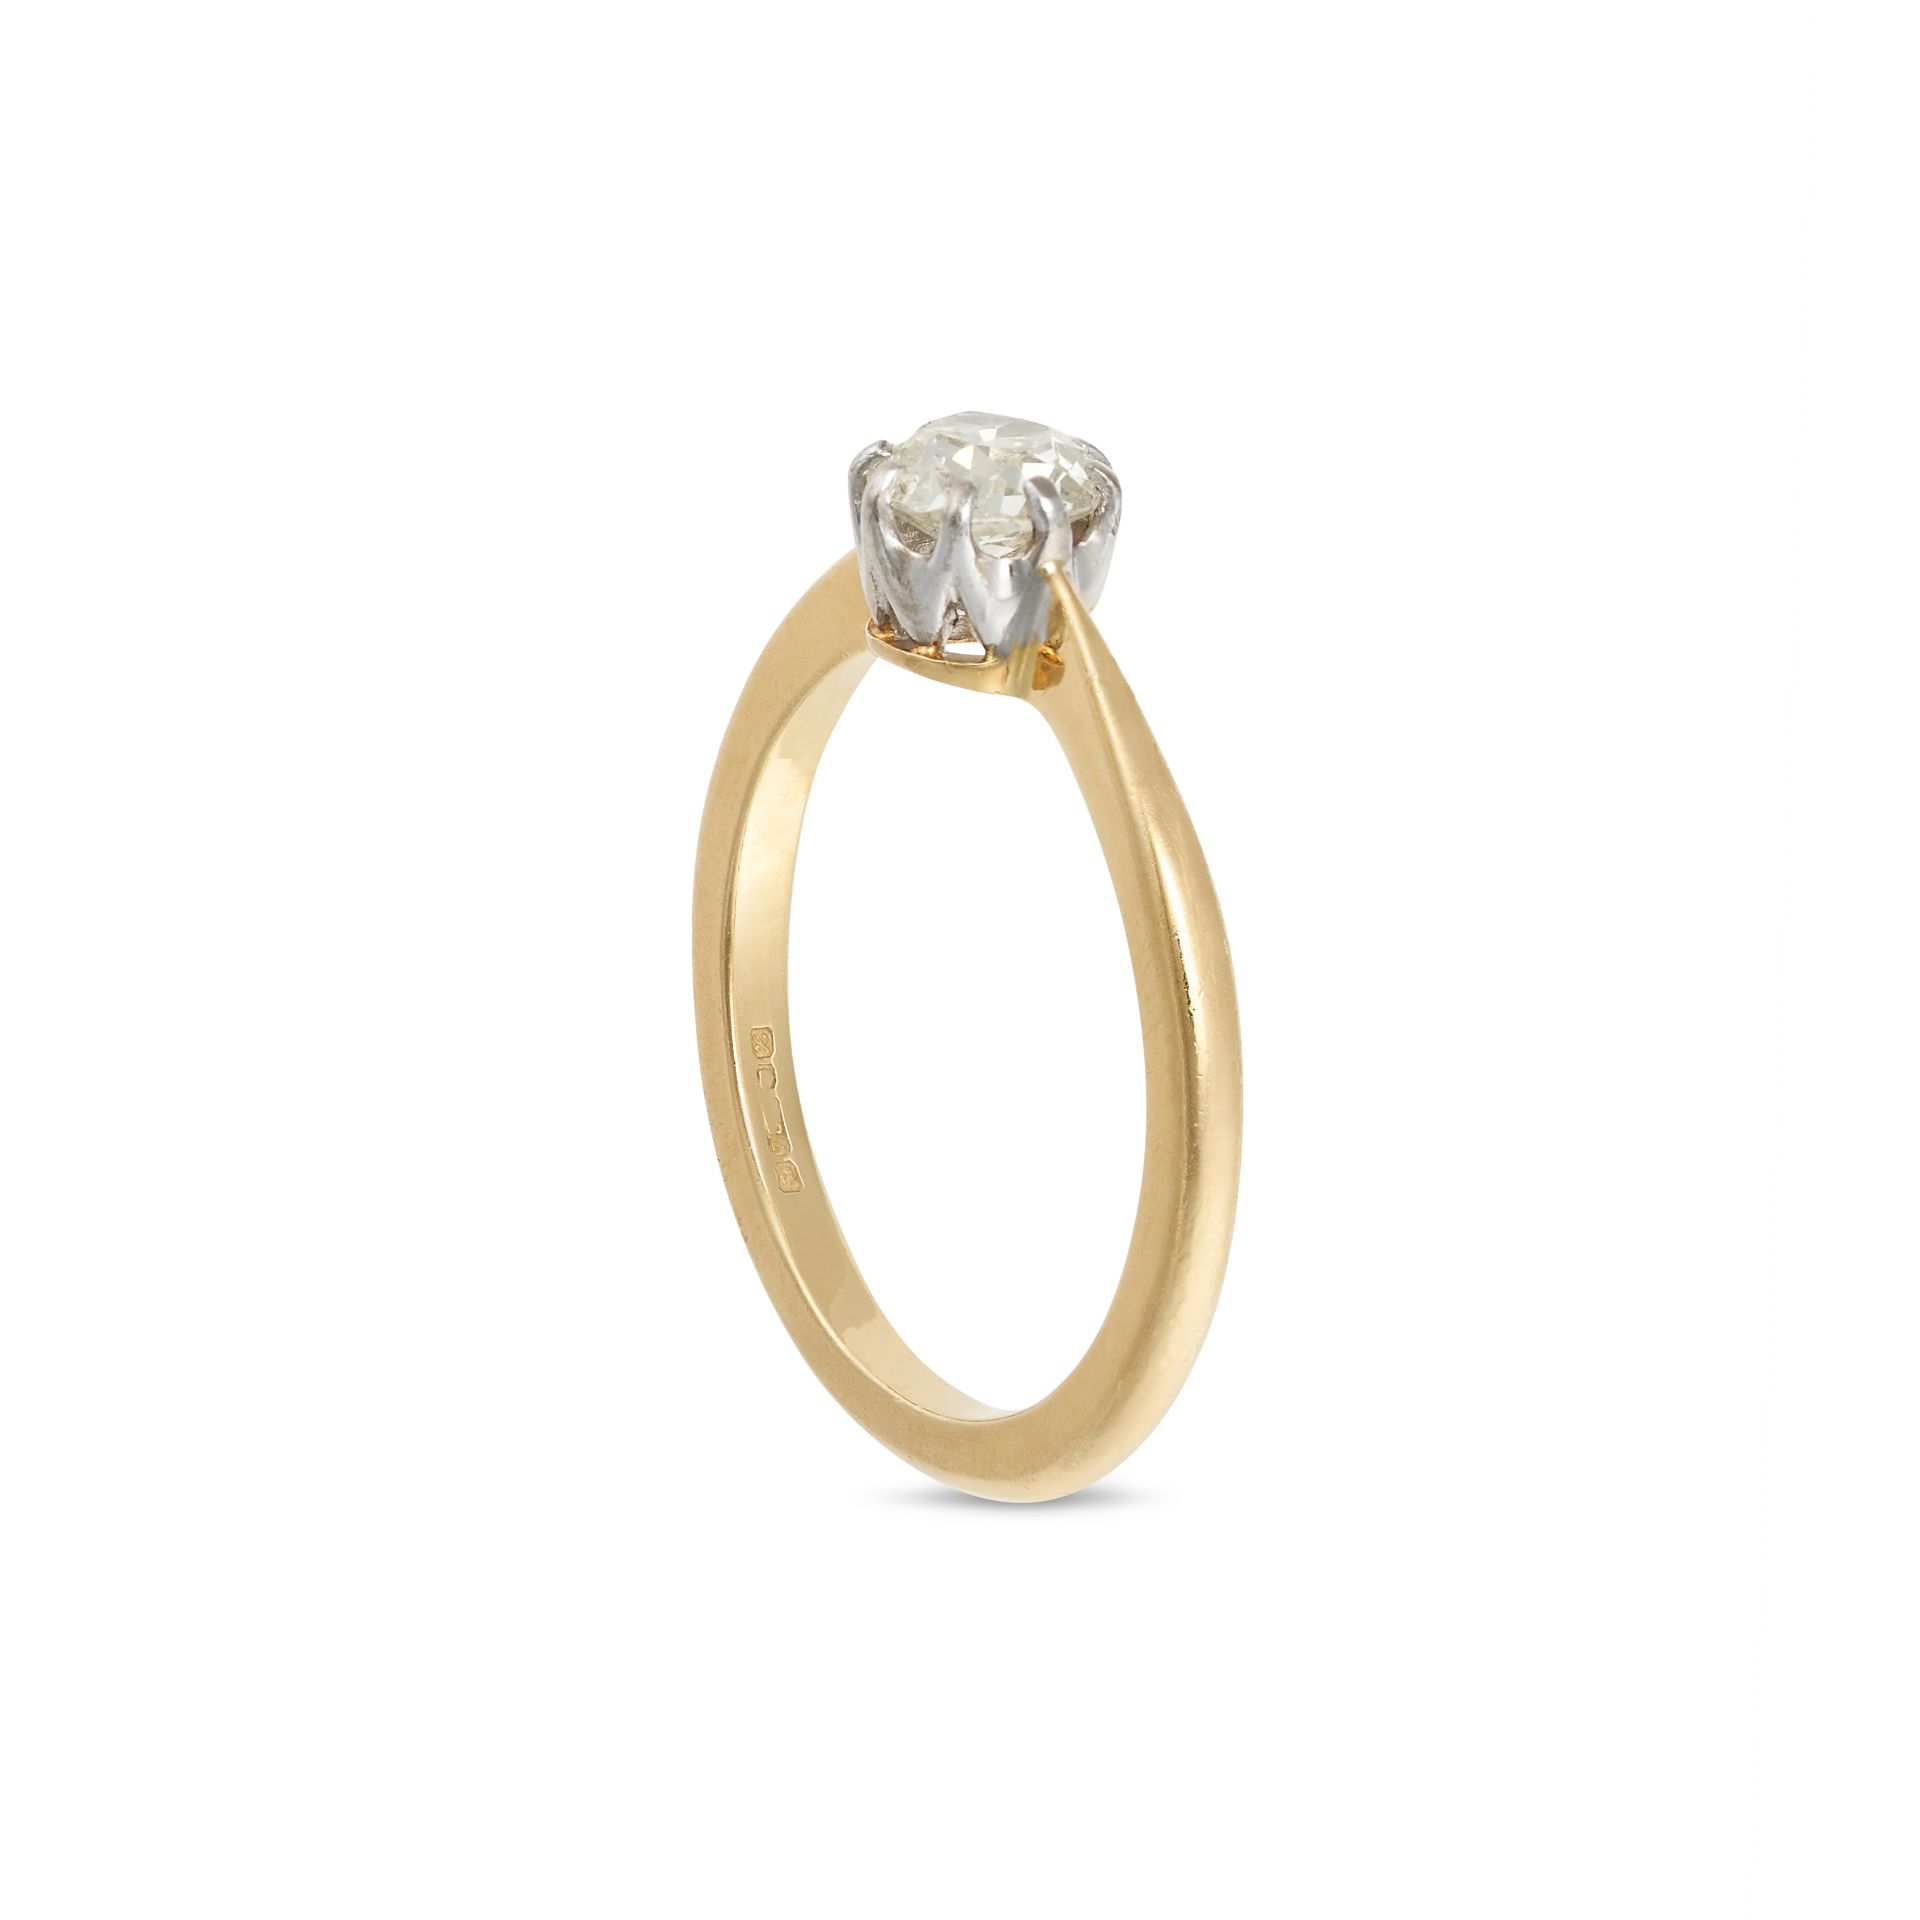 NO RESERVE - A SOLITAIRE DIAMOND RING in 18ct yellow gold, set with an old cut diamond of approxi... - Image 2 of 2